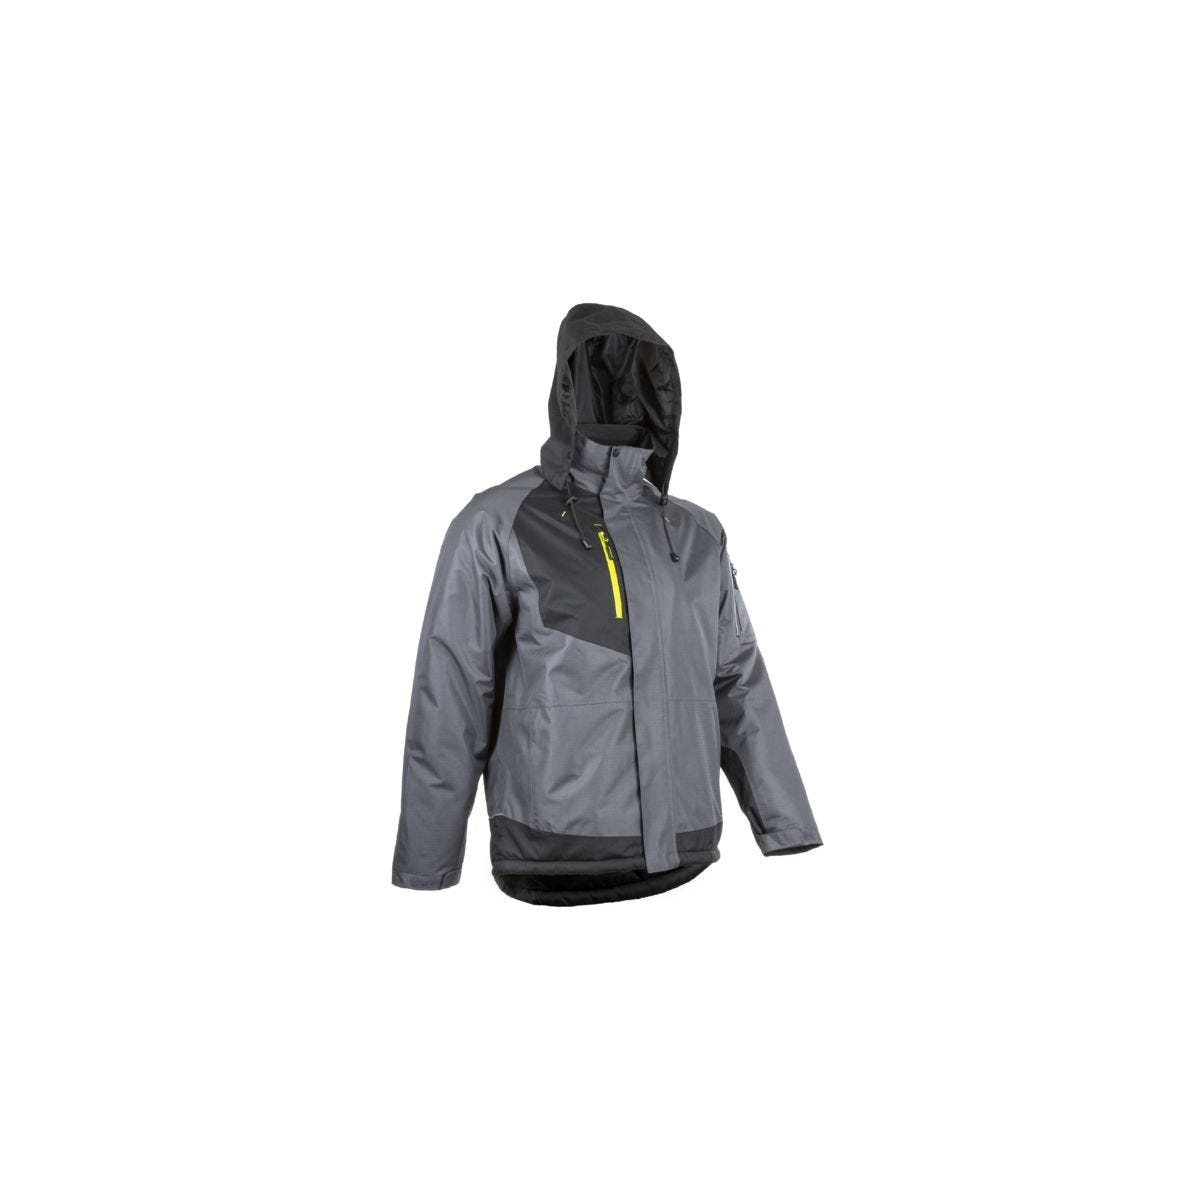 YUZU Parka anthracite/noir, Polyester Ripstop + Polaire 300g/m² - COVERGUARD - Taille 4XL 2